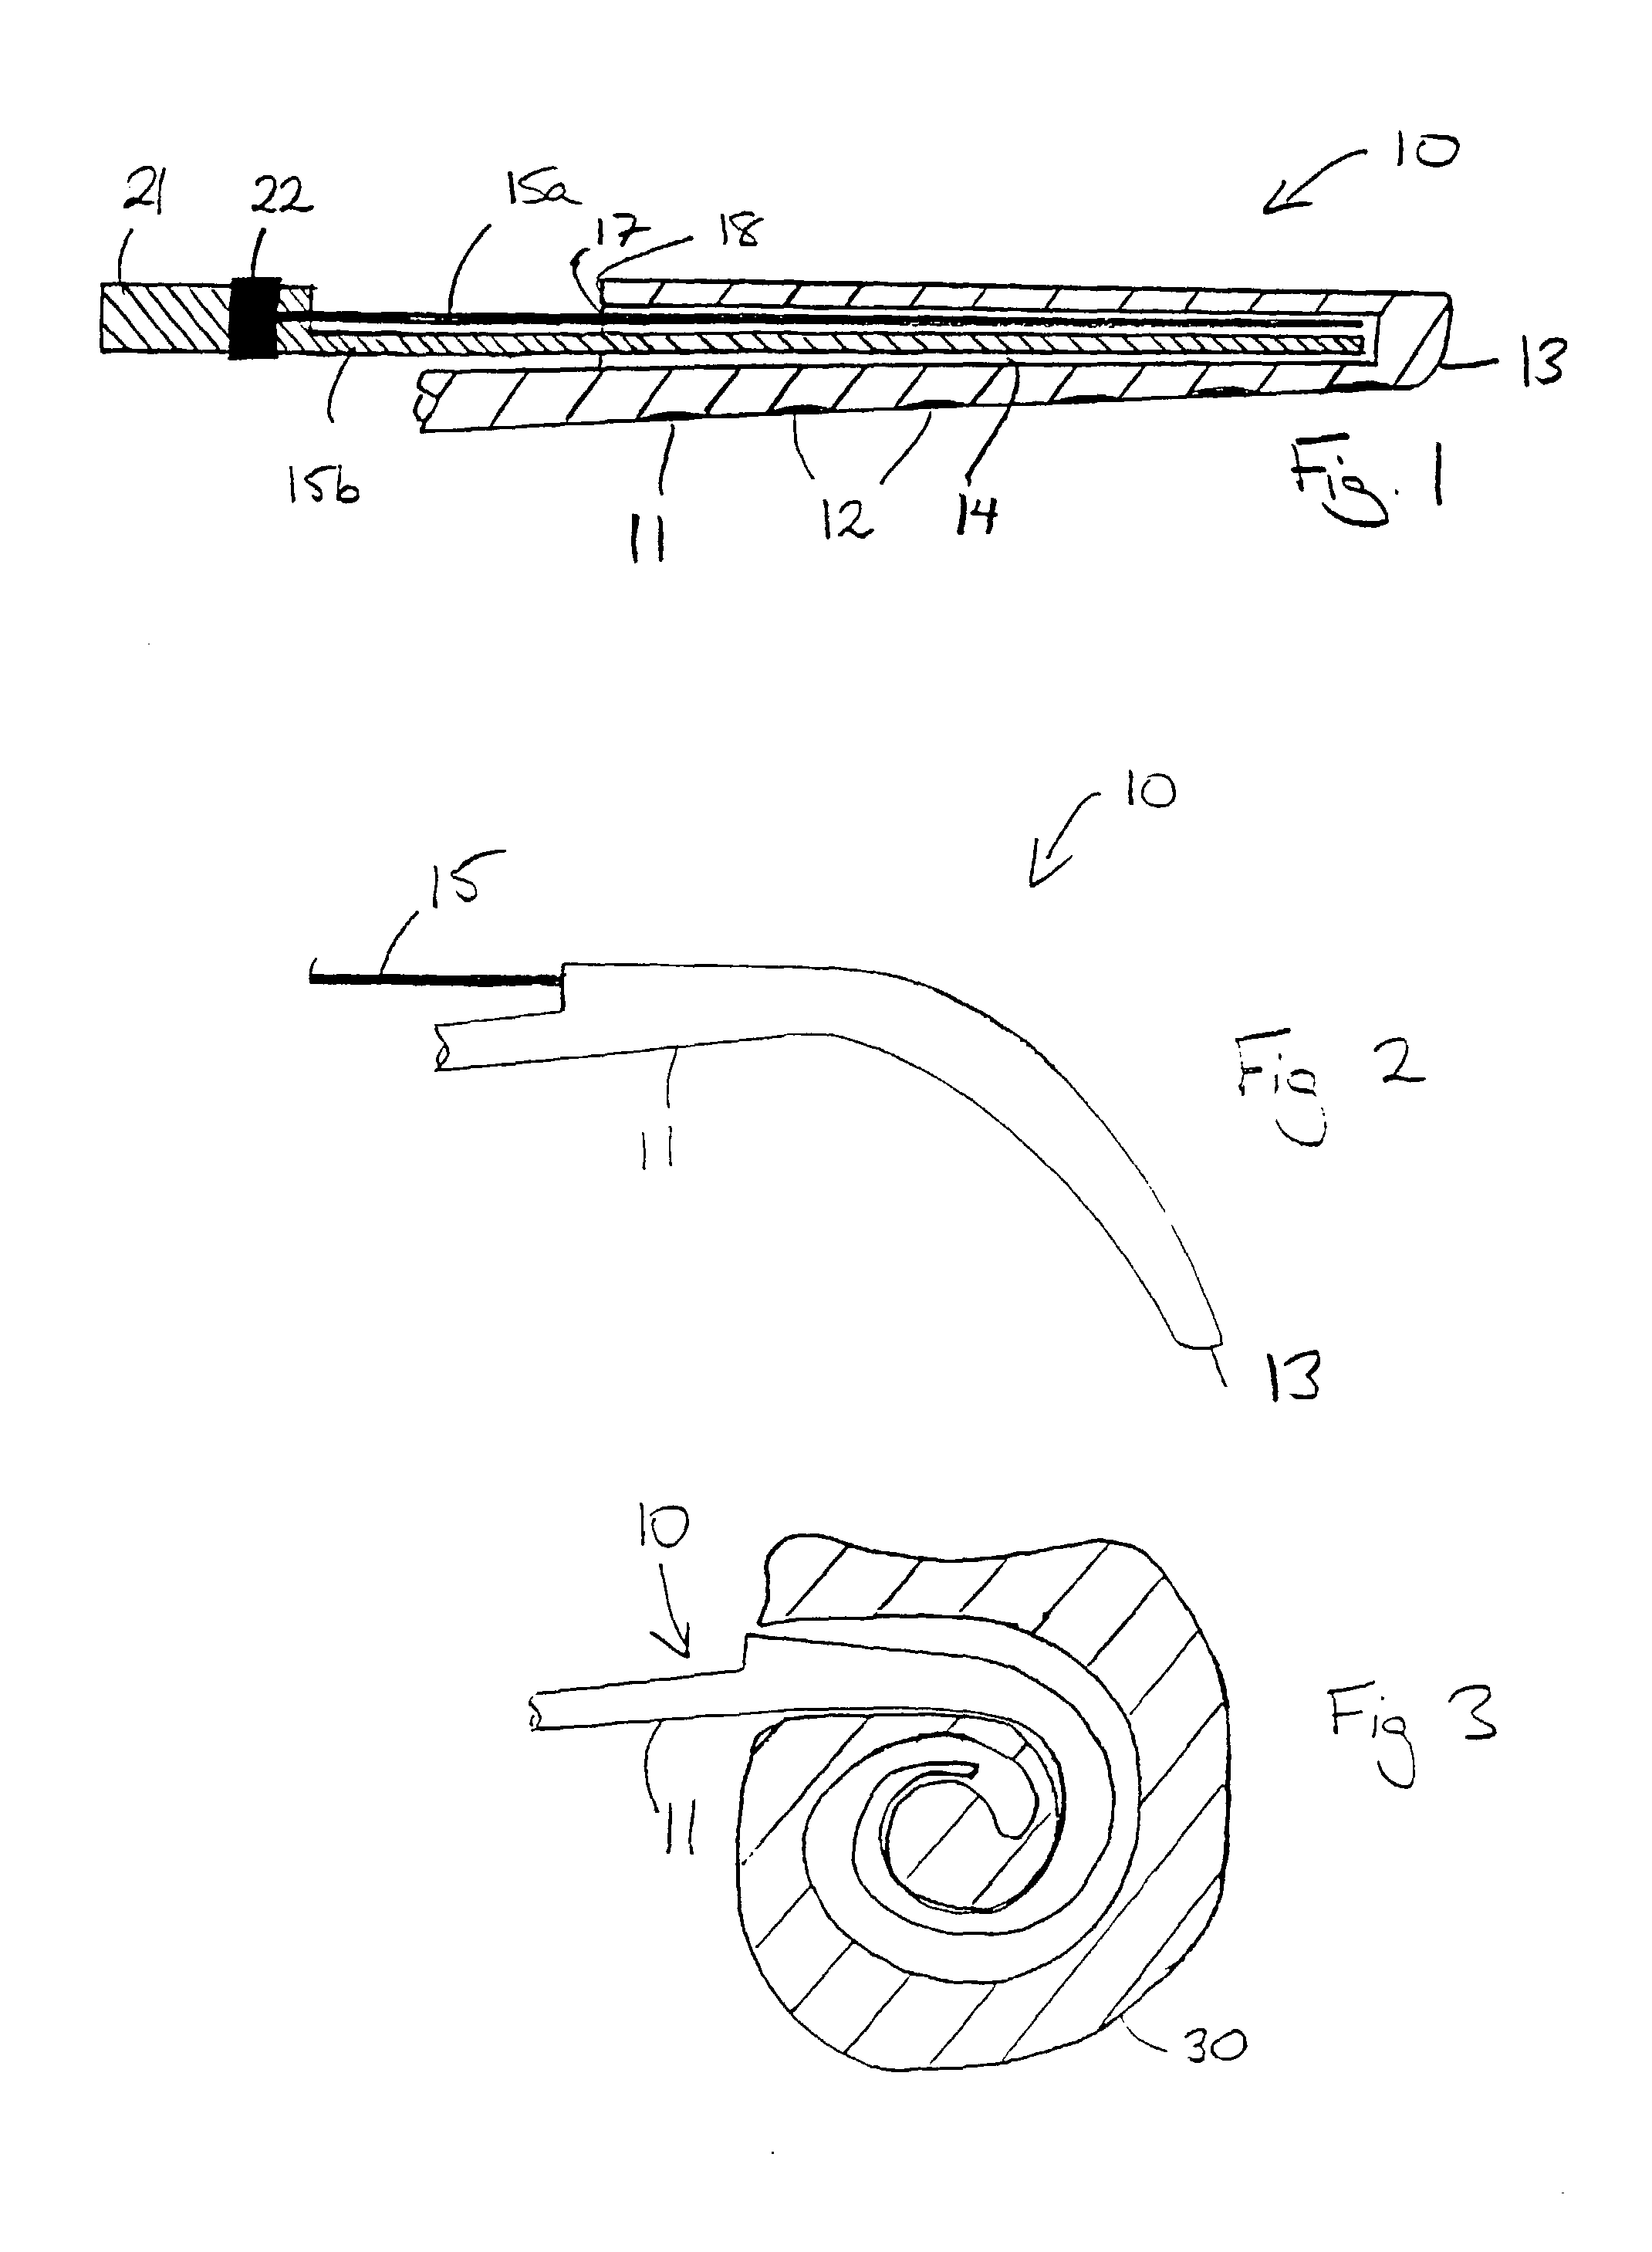 Double stylet insertion tool for a cochlear implant electrode array